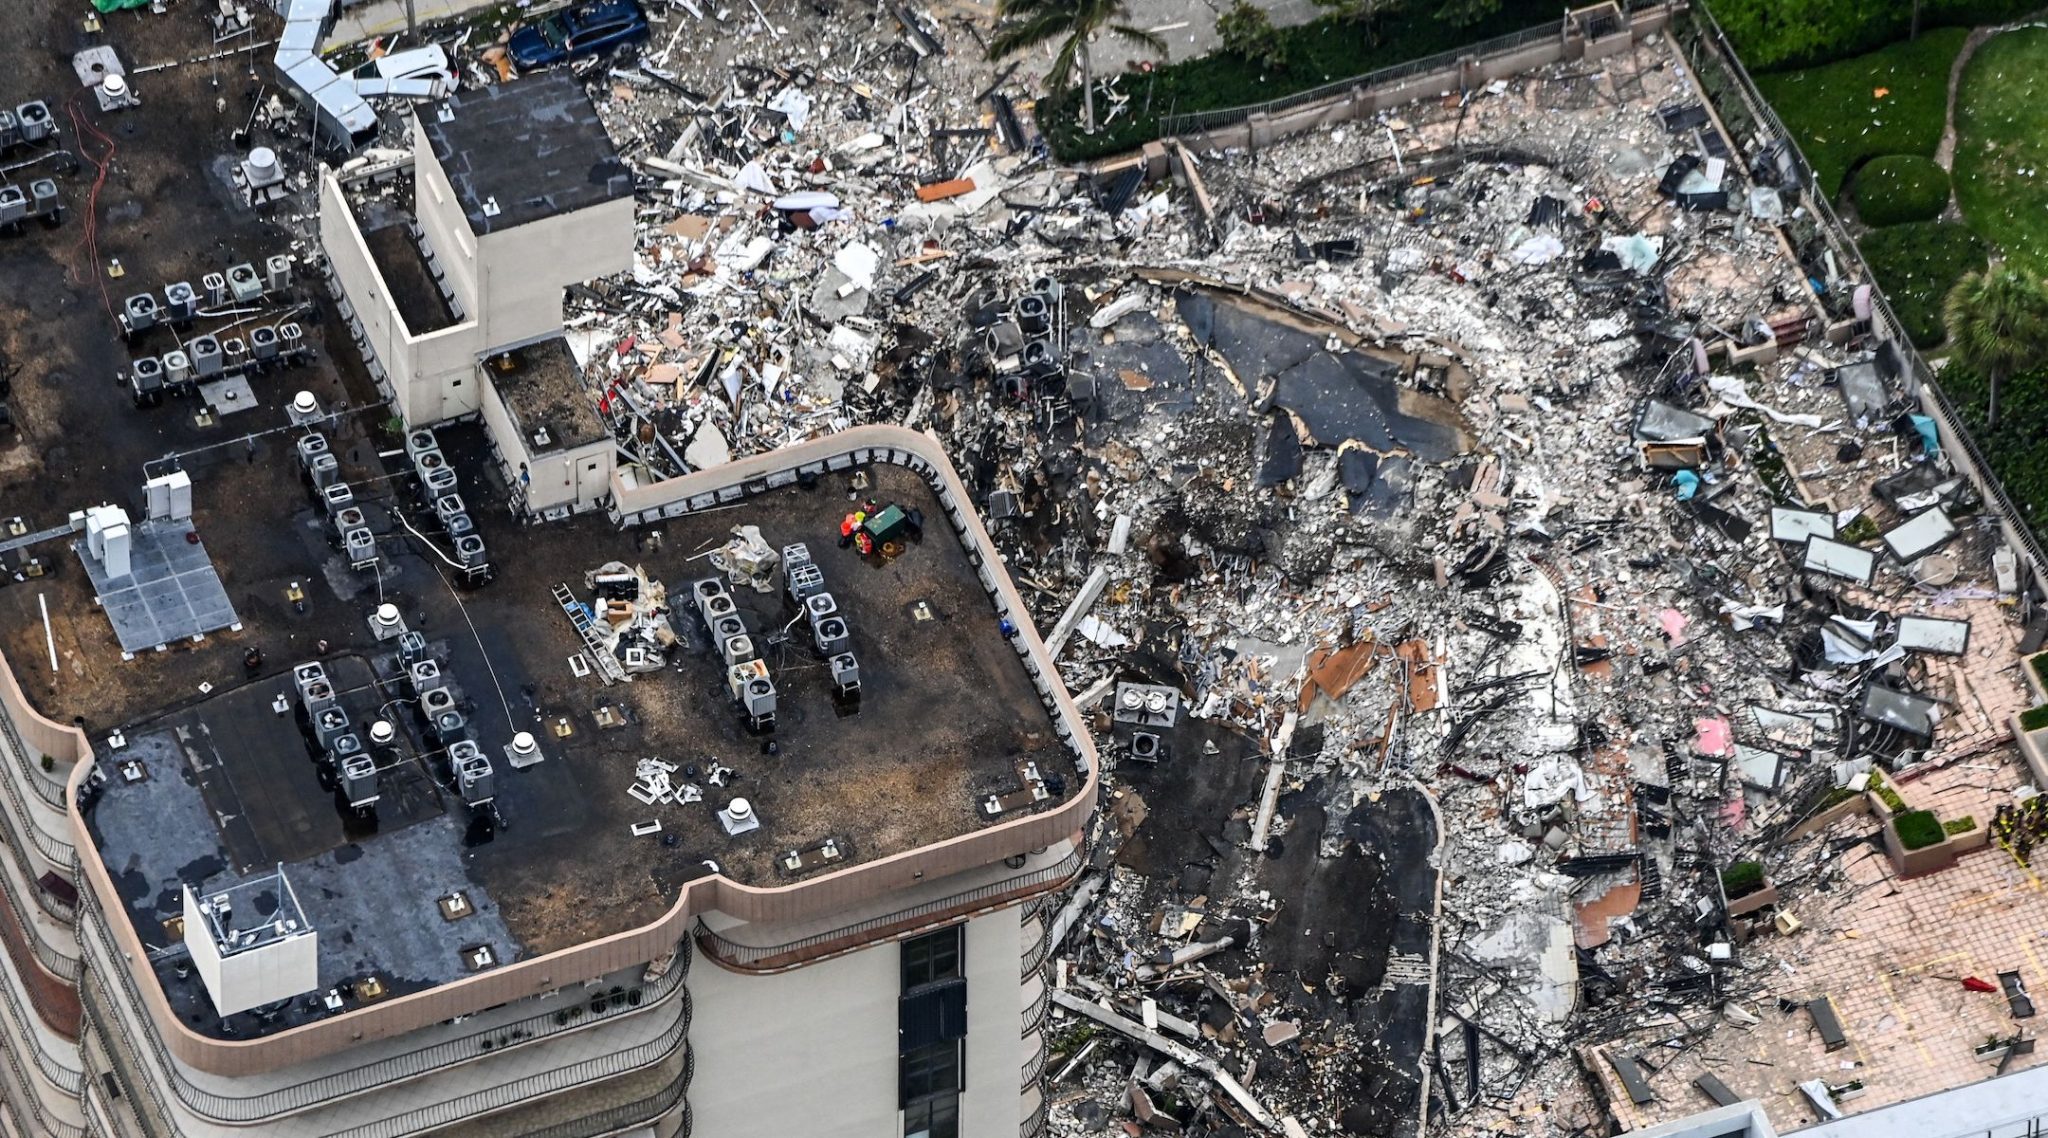 Search and rescue personnel working on site after the partial collapse of the Champlain Towers South in Surfside, Florida on June 24, 2021. (Photo/JTA-Chandan Khanna-AFP via Getty Images)